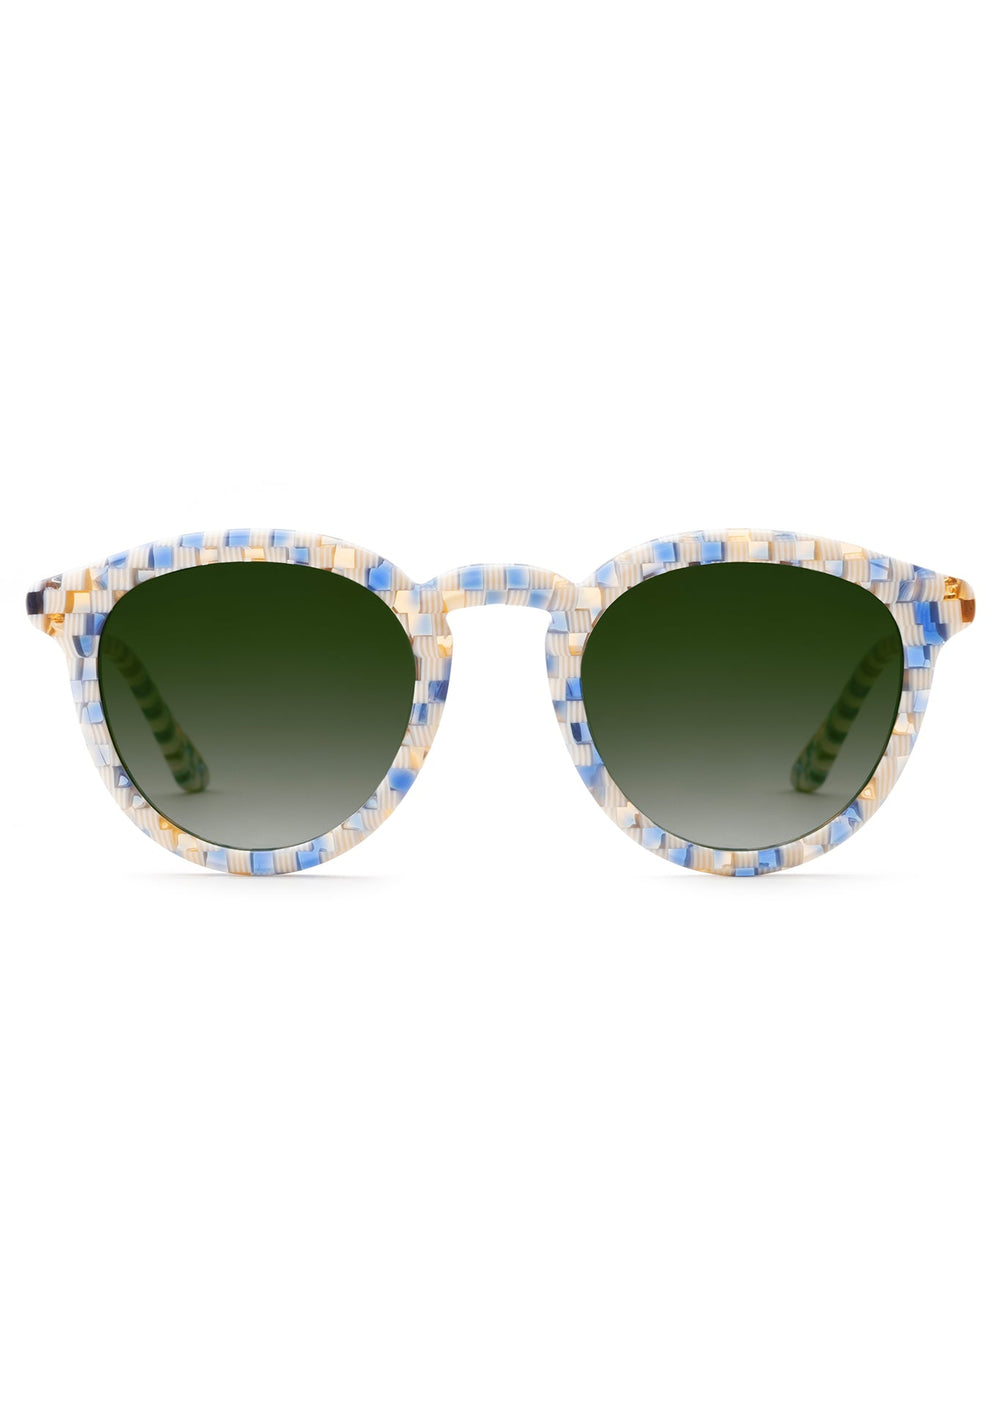 KREWE SUNGLASSES - COLLINS | Pincheck handcrafted, luxury blue and white checkered round sunglasses